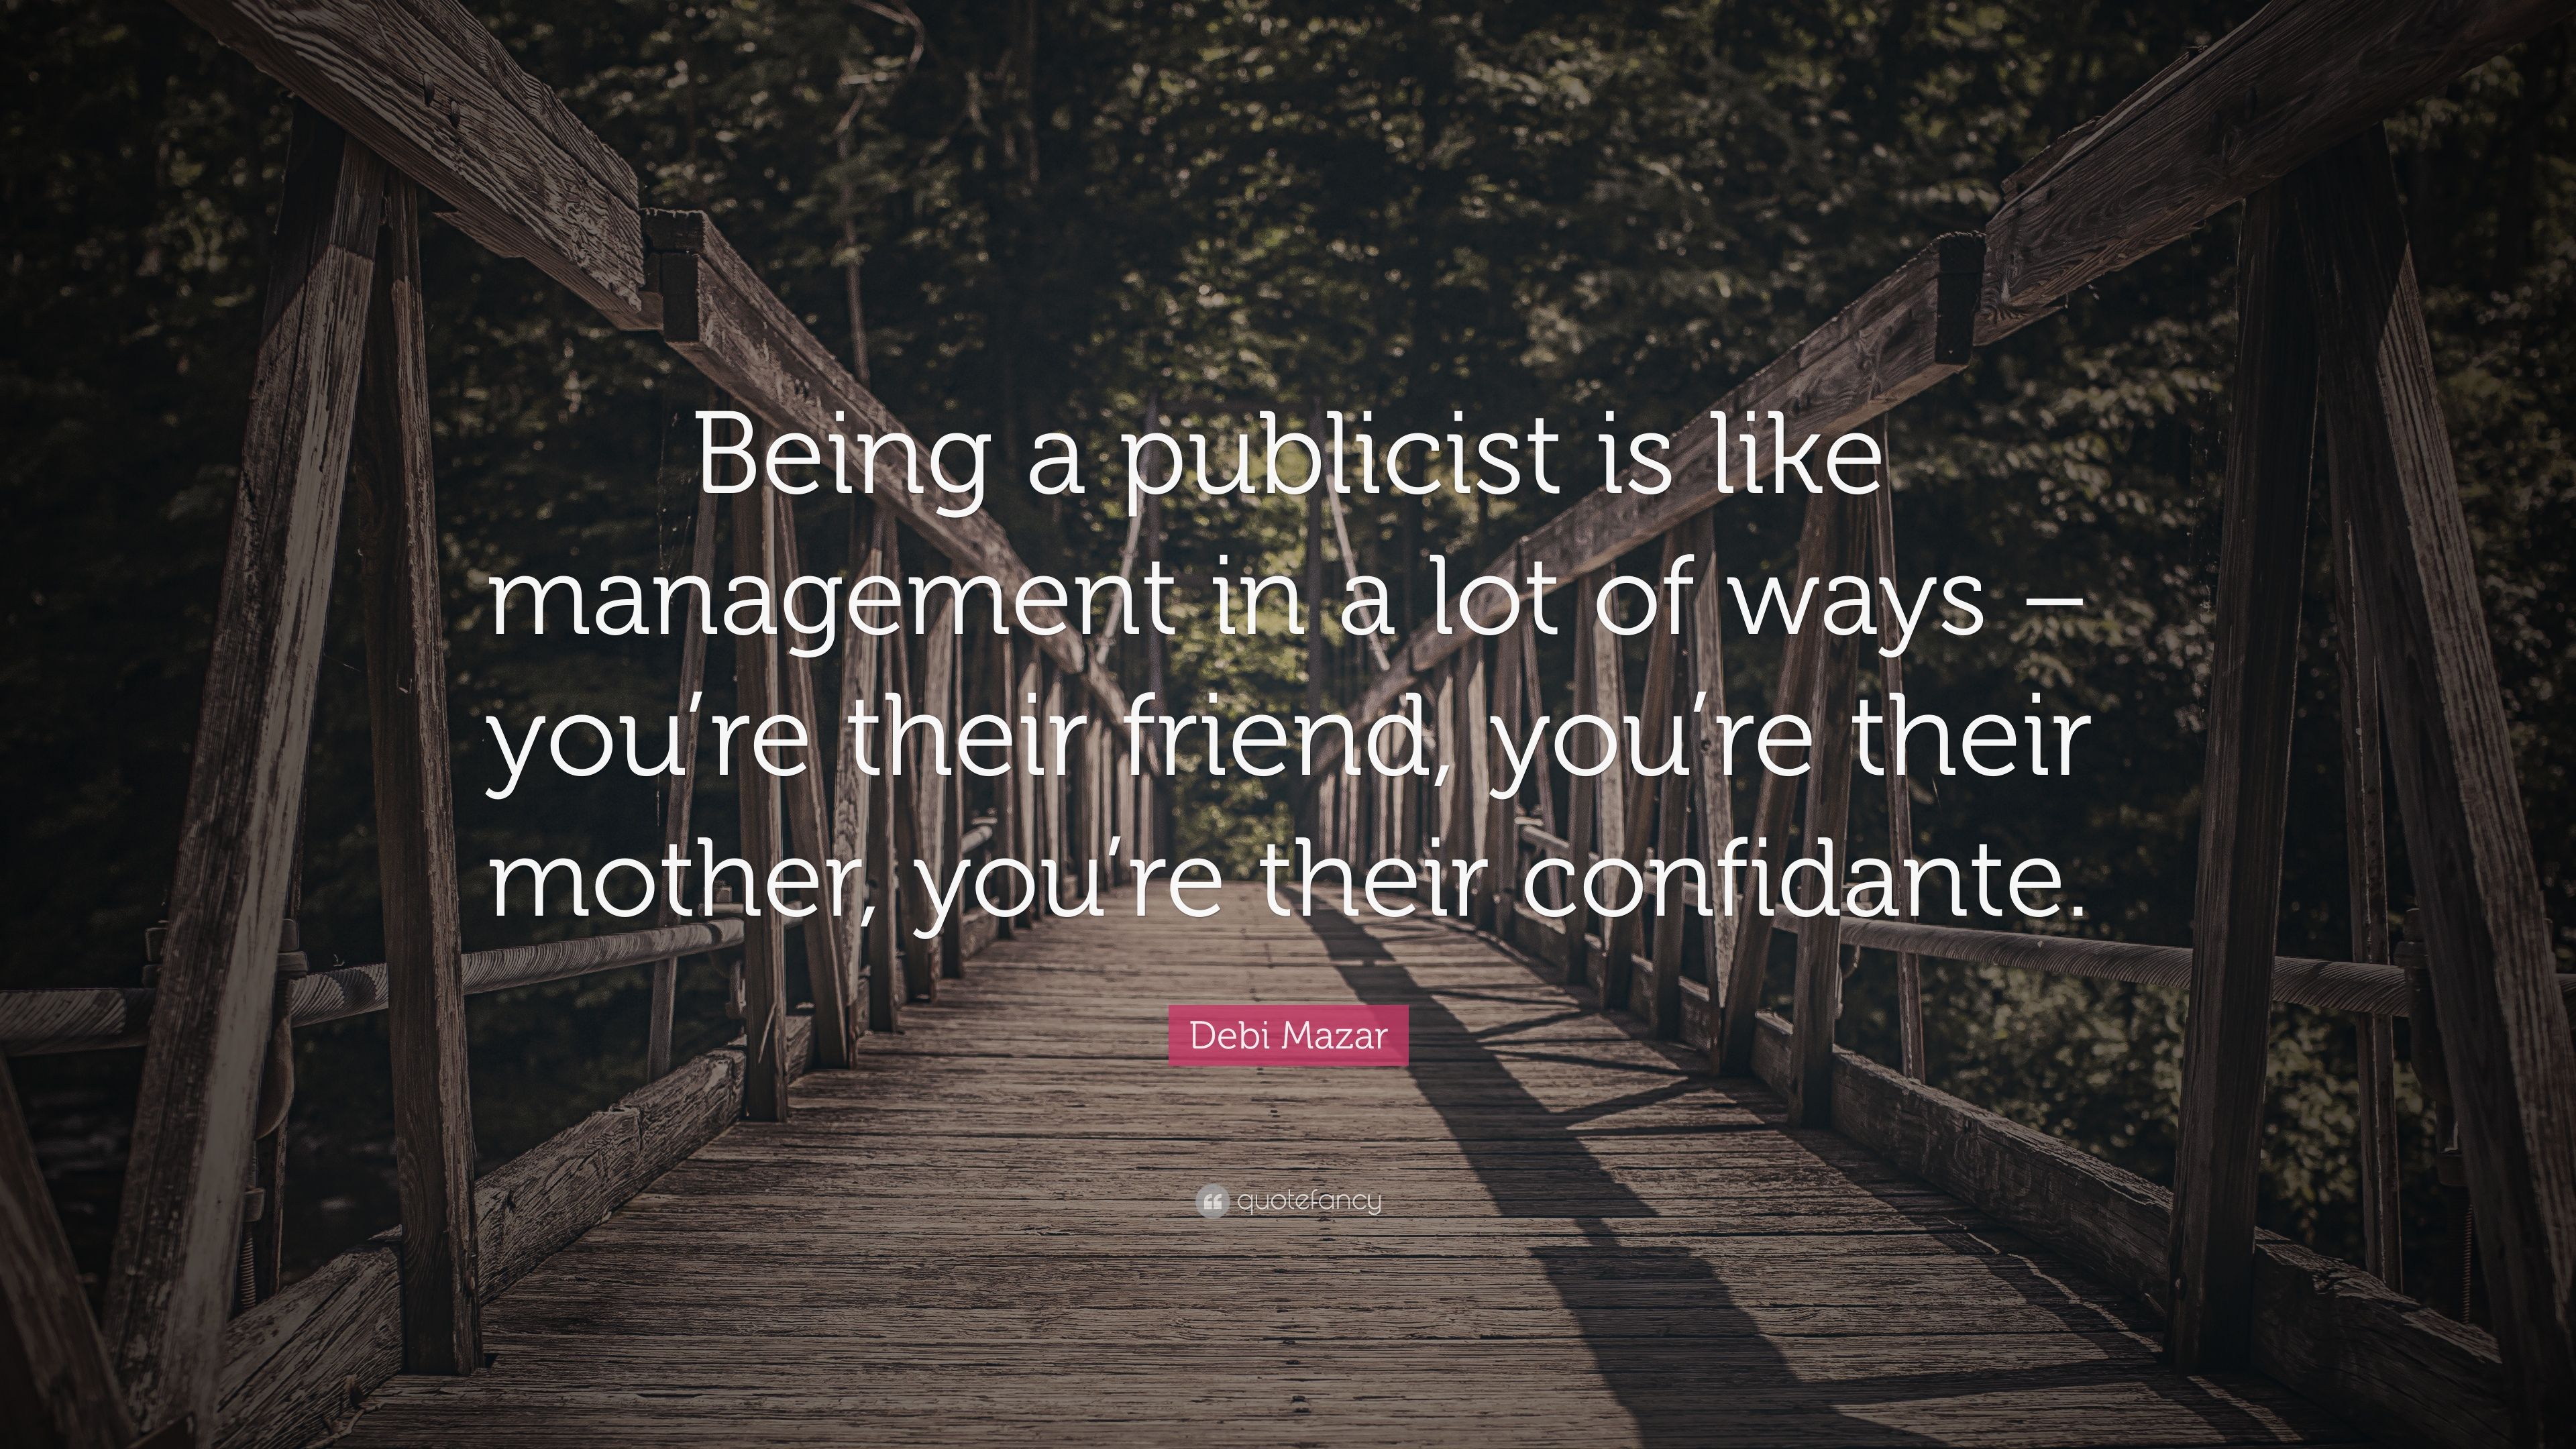 Debi Mazar Quote: “Being a publicist is like management in a lot